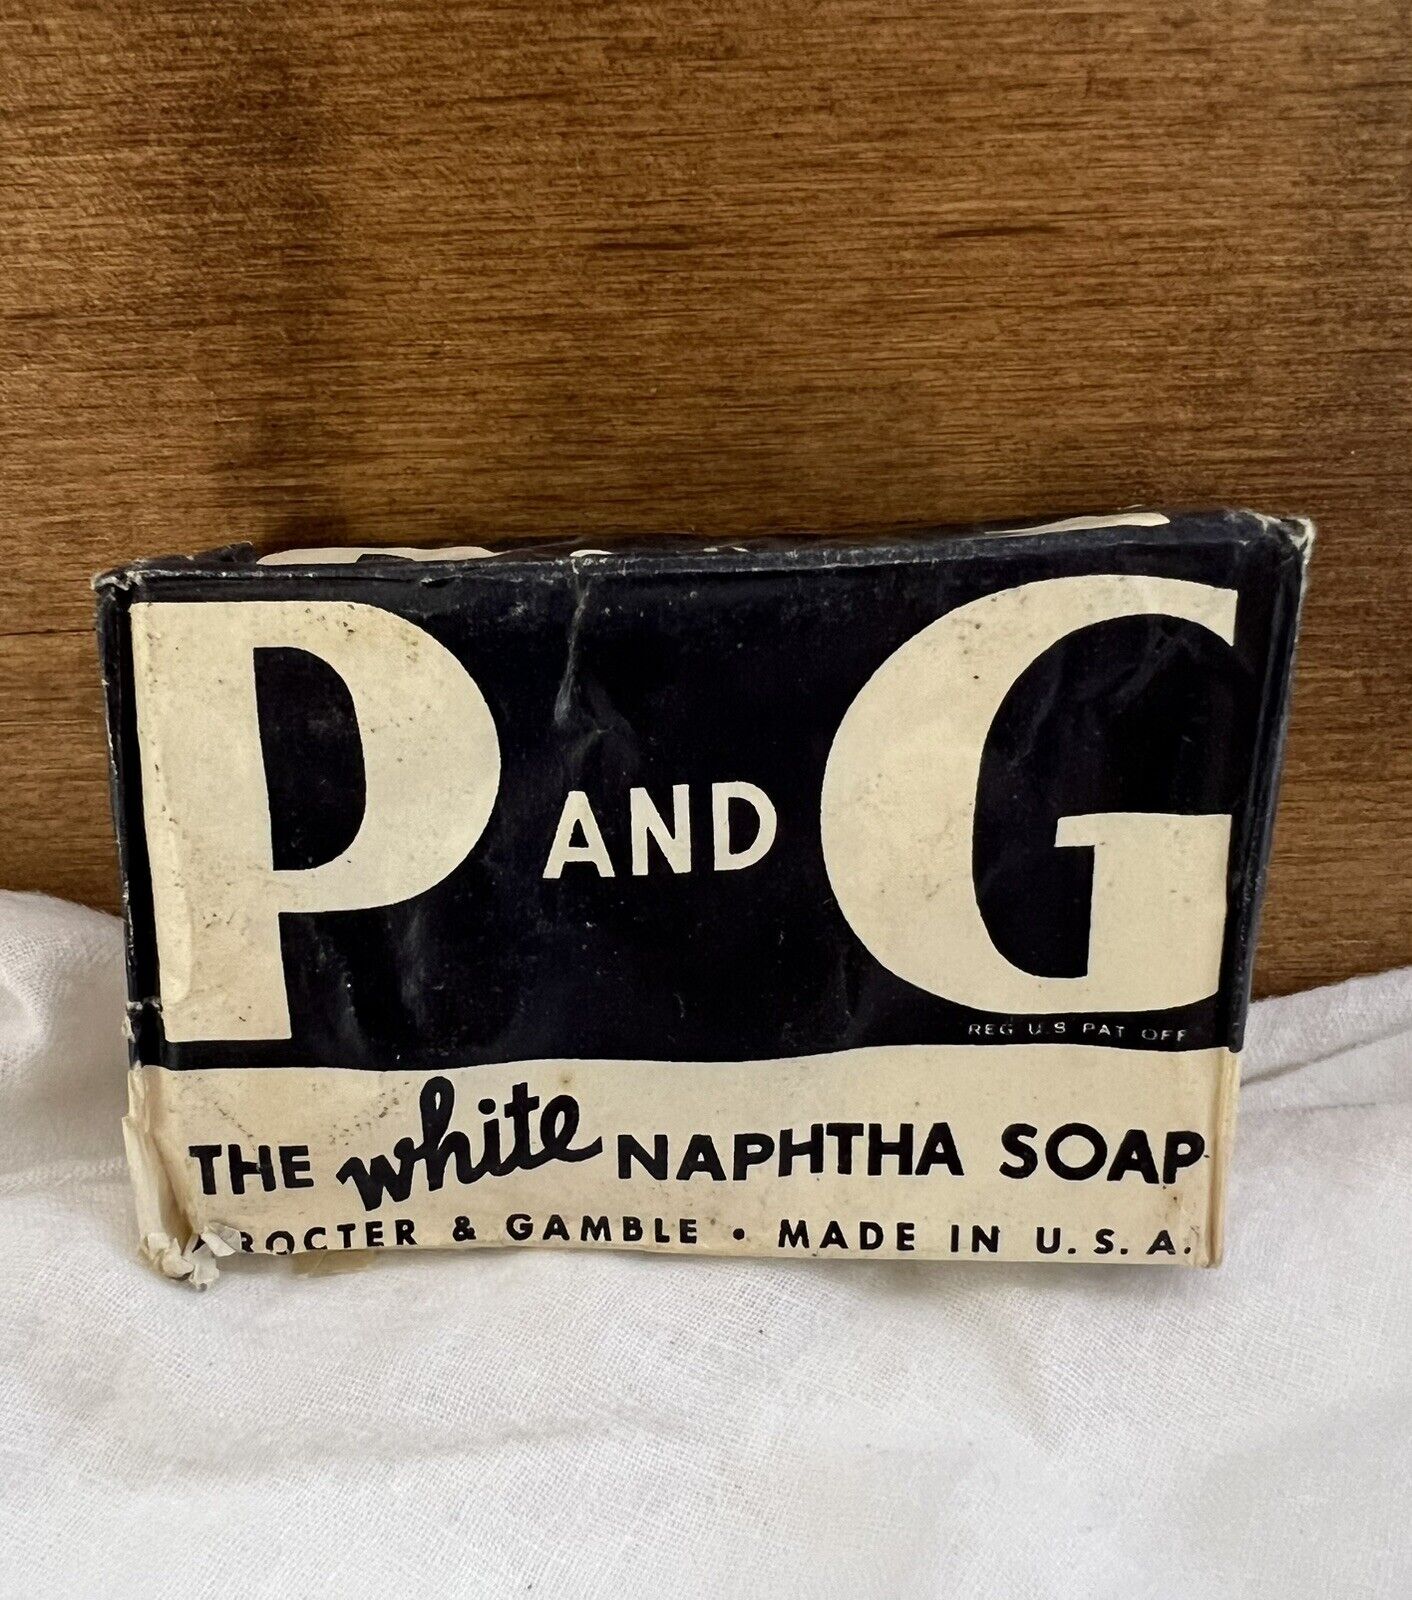 Vintage P And G The White Naphtha Soap by Procter & Gamble Bar Unopened